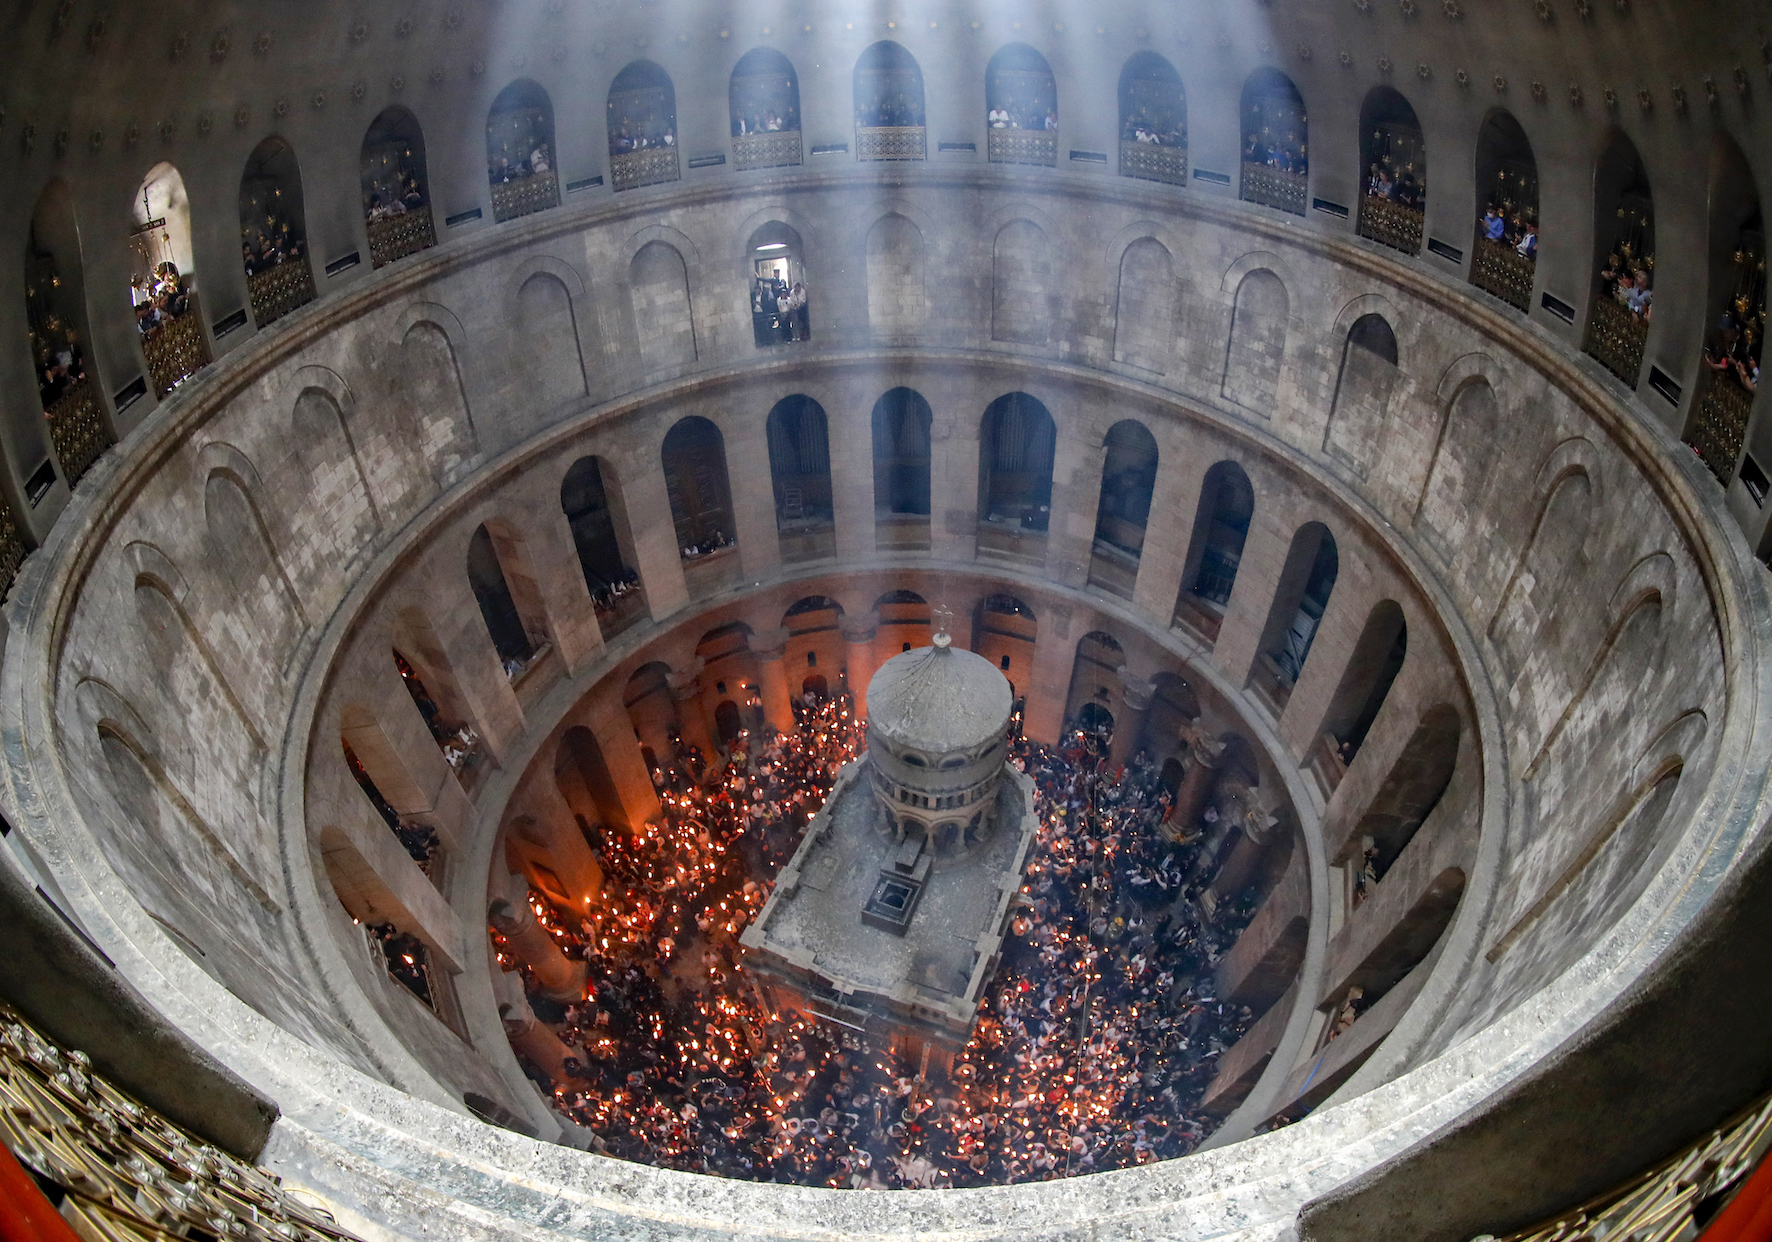 Orthodox Christians gather with lit candles around the Edicule, traditionally believed to be the burial site of Jesus Christ, during the Holy Fire ceremony at Jerusalem's Holy Sepulchre (Ahmed Gharabli/AFP)